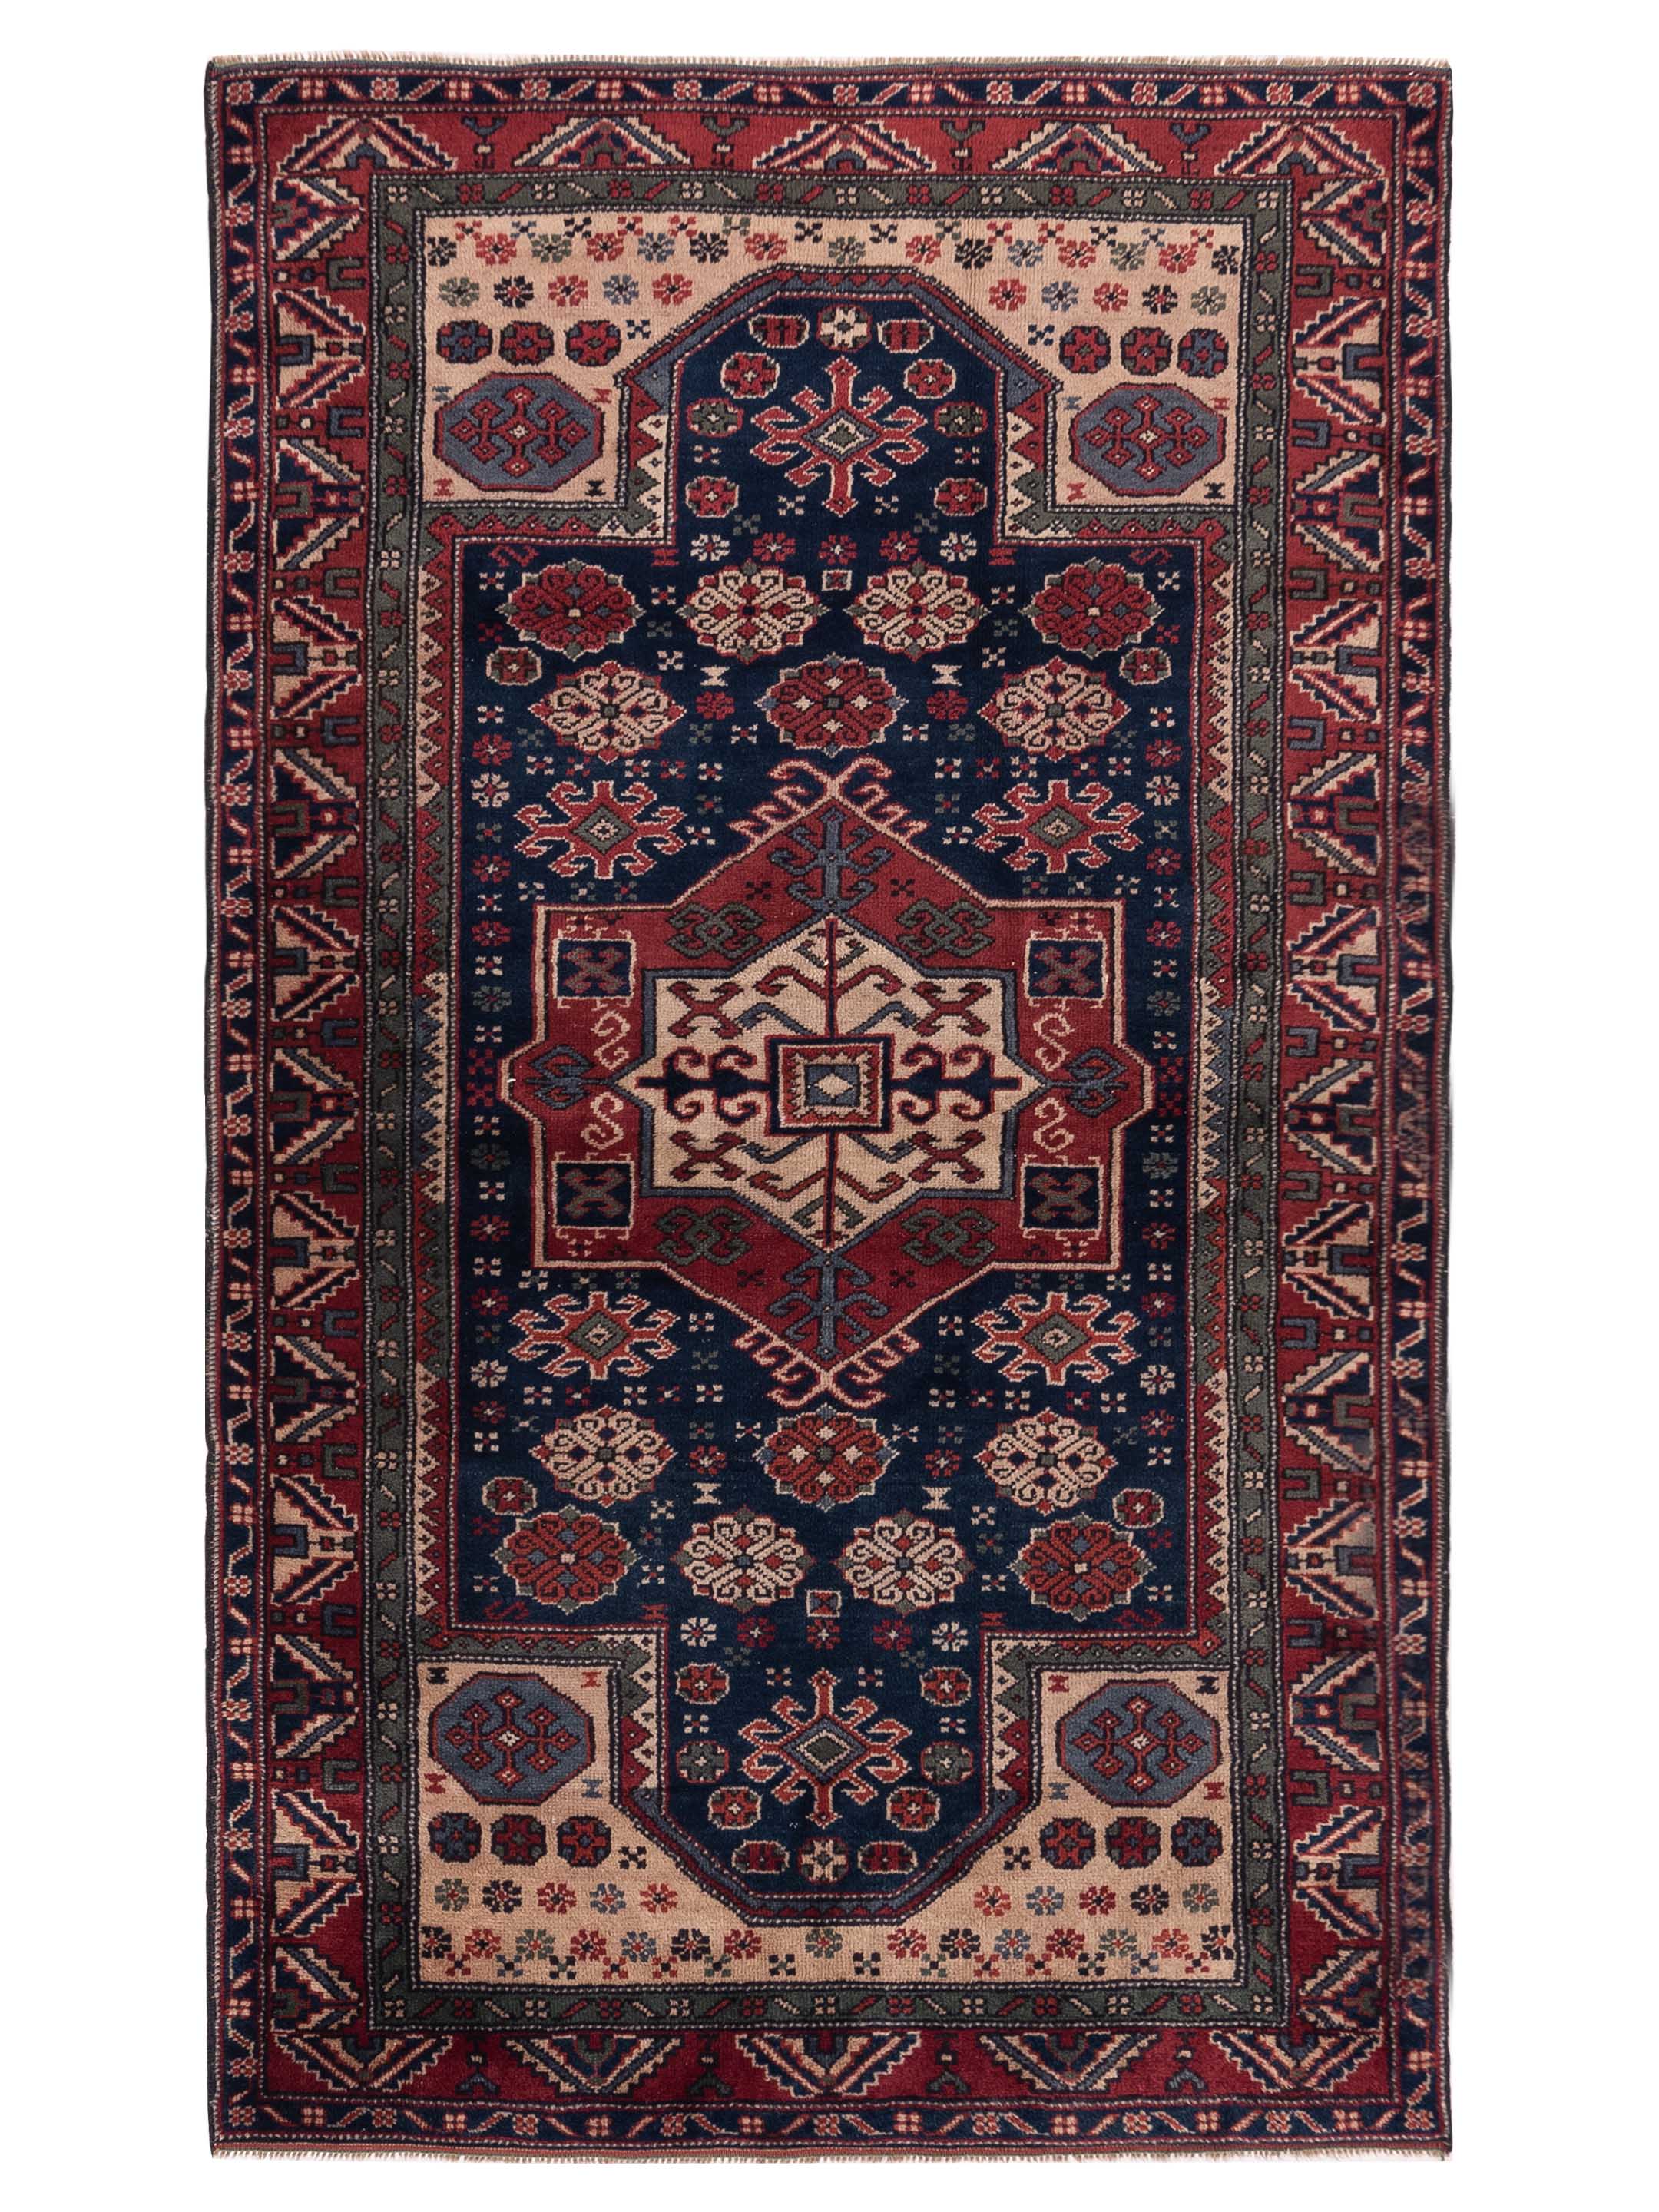 Antique Heirloom Traditional Navy Blue Rust 4x7 Area Rug	